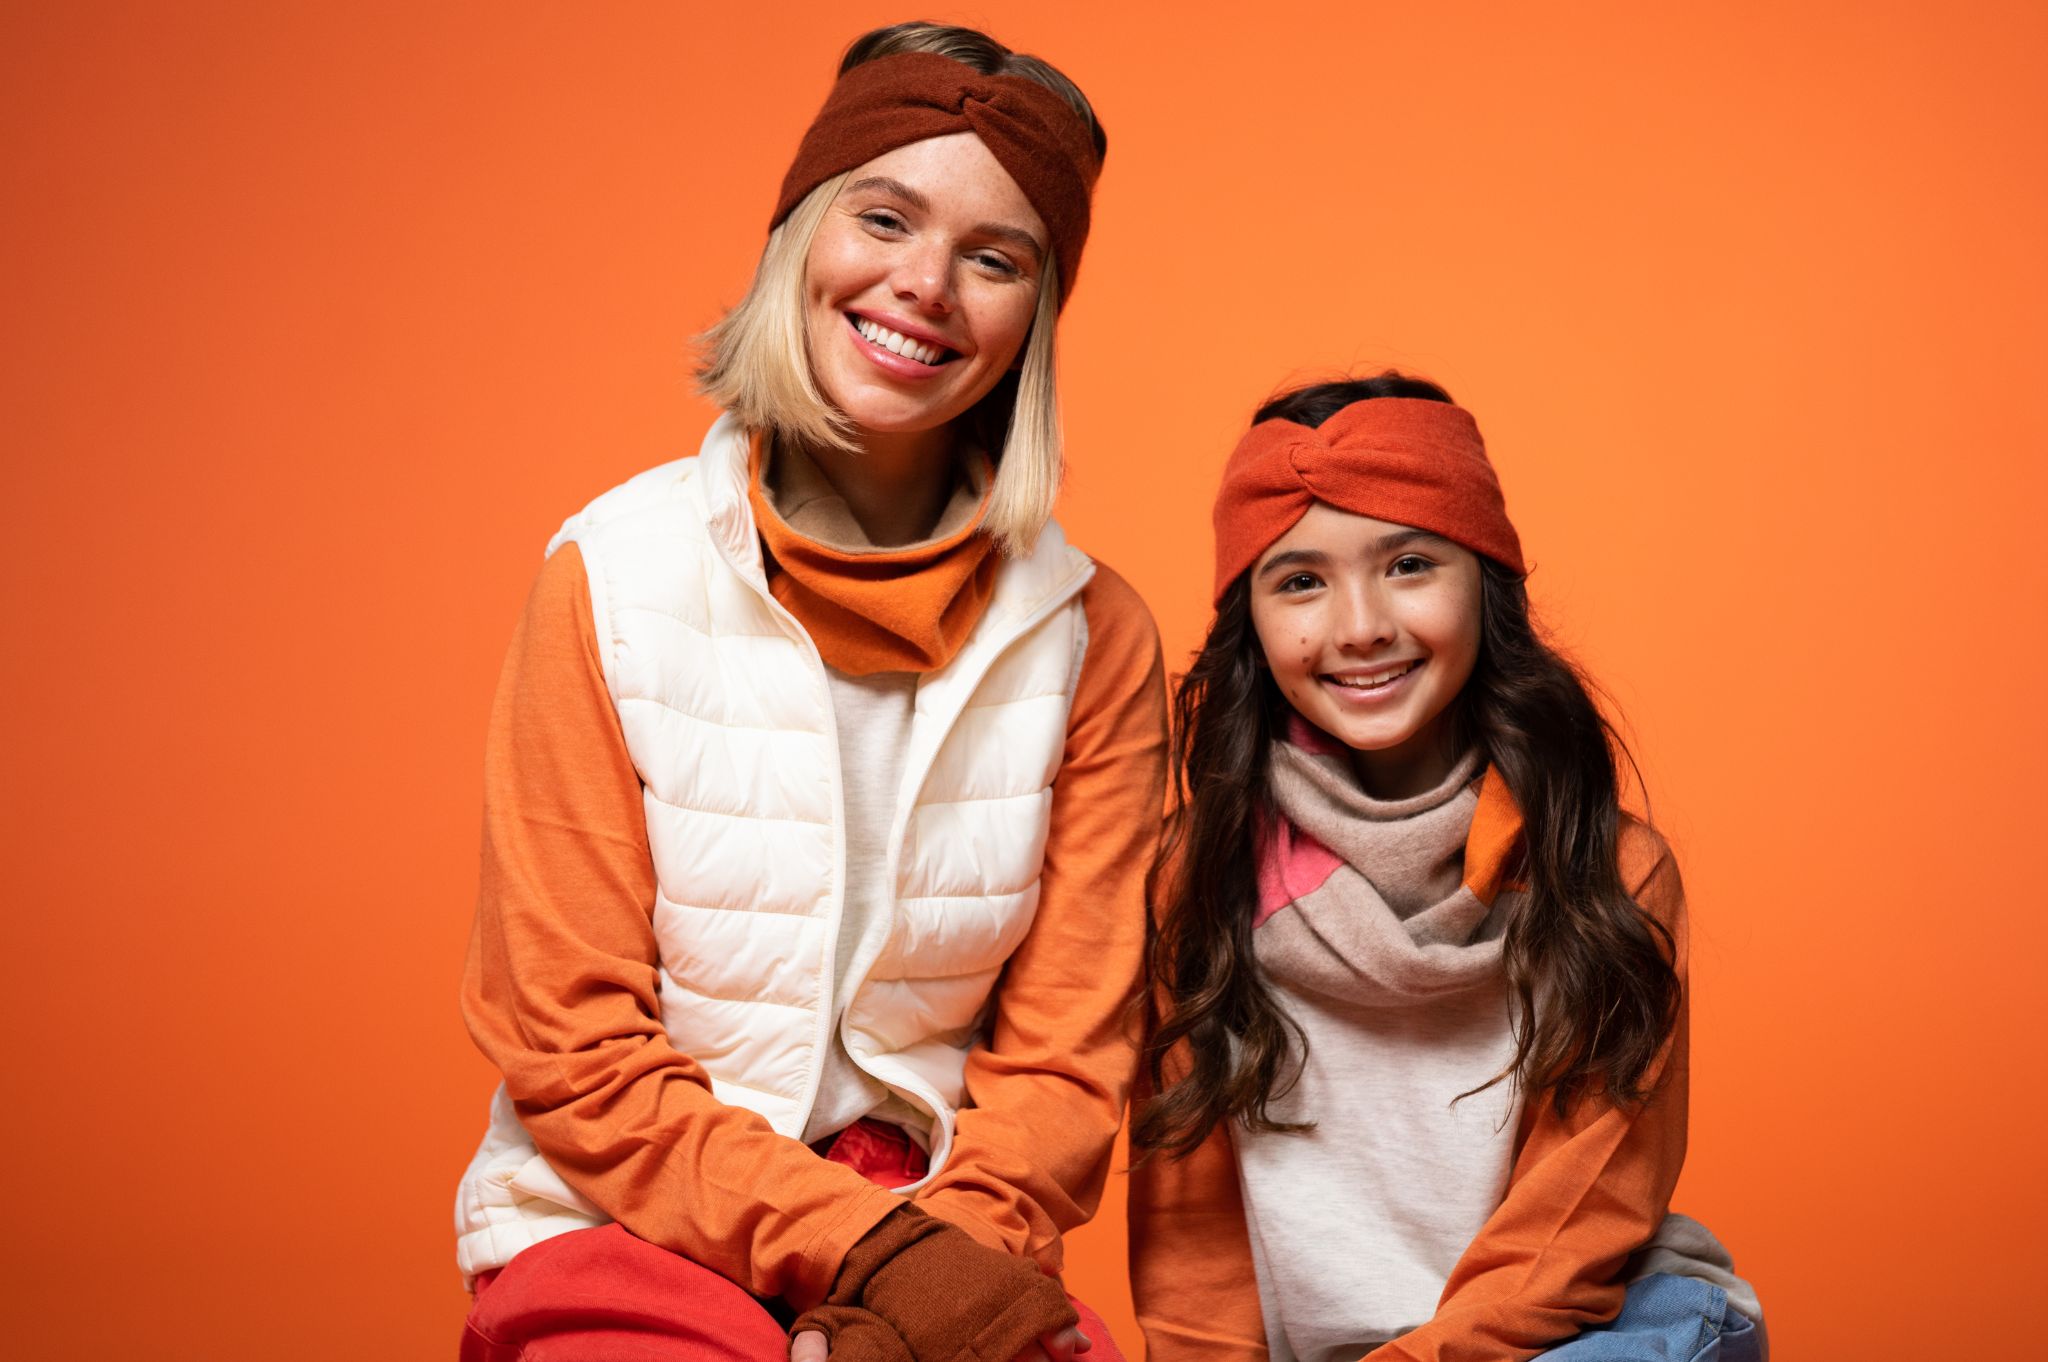 IU C&I Studios Portfolio BB Sheep Lifestyle Colors PROOF Female and girl models posing for the camera smiling against an orange backdrop